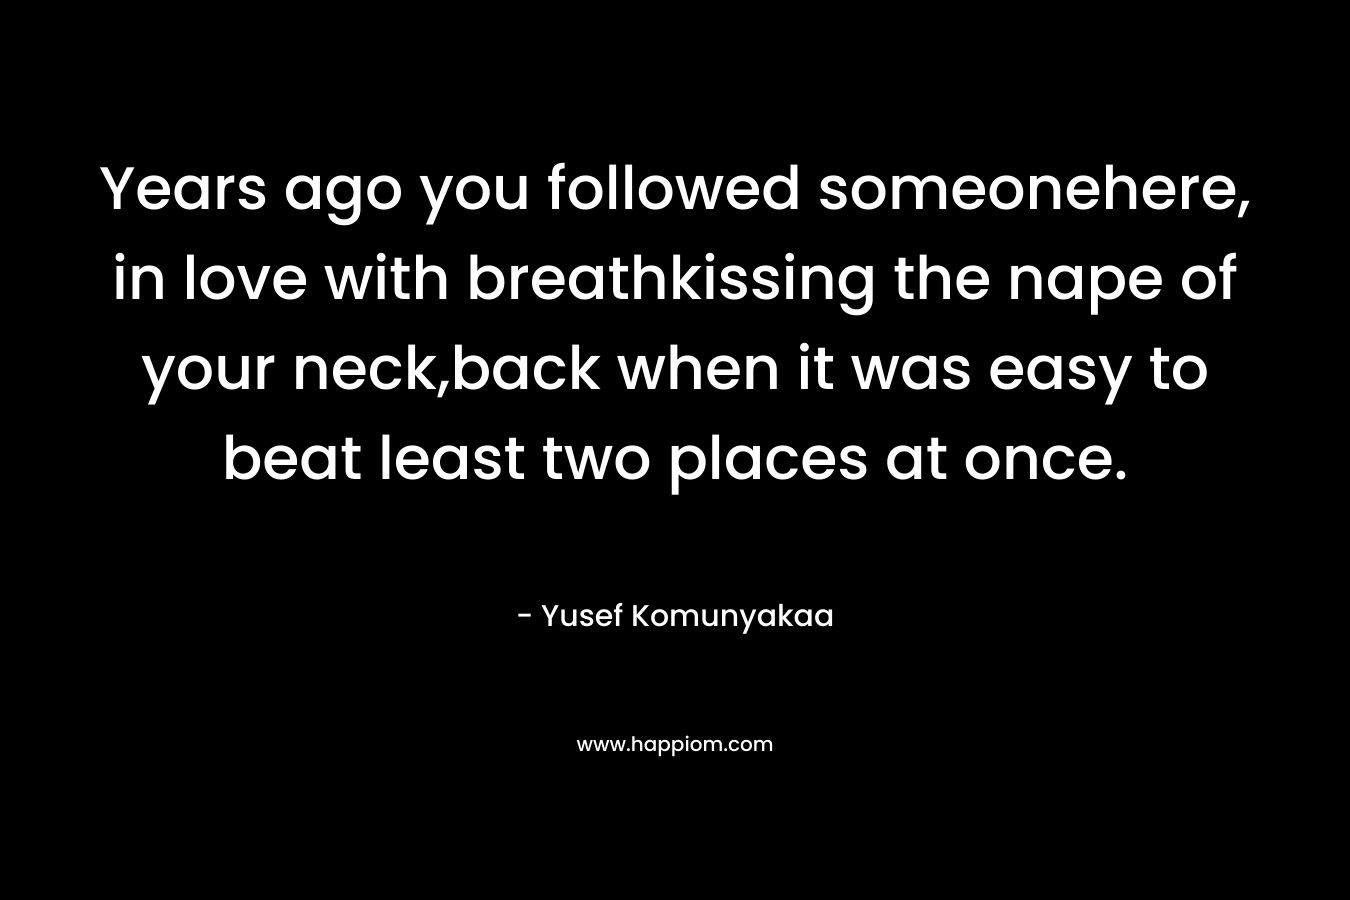 Years ago you followed someonehere, in love with breathkissing the nape of your neck,back when it was easy to beat least two places at once. – Yusef Komunyakaa